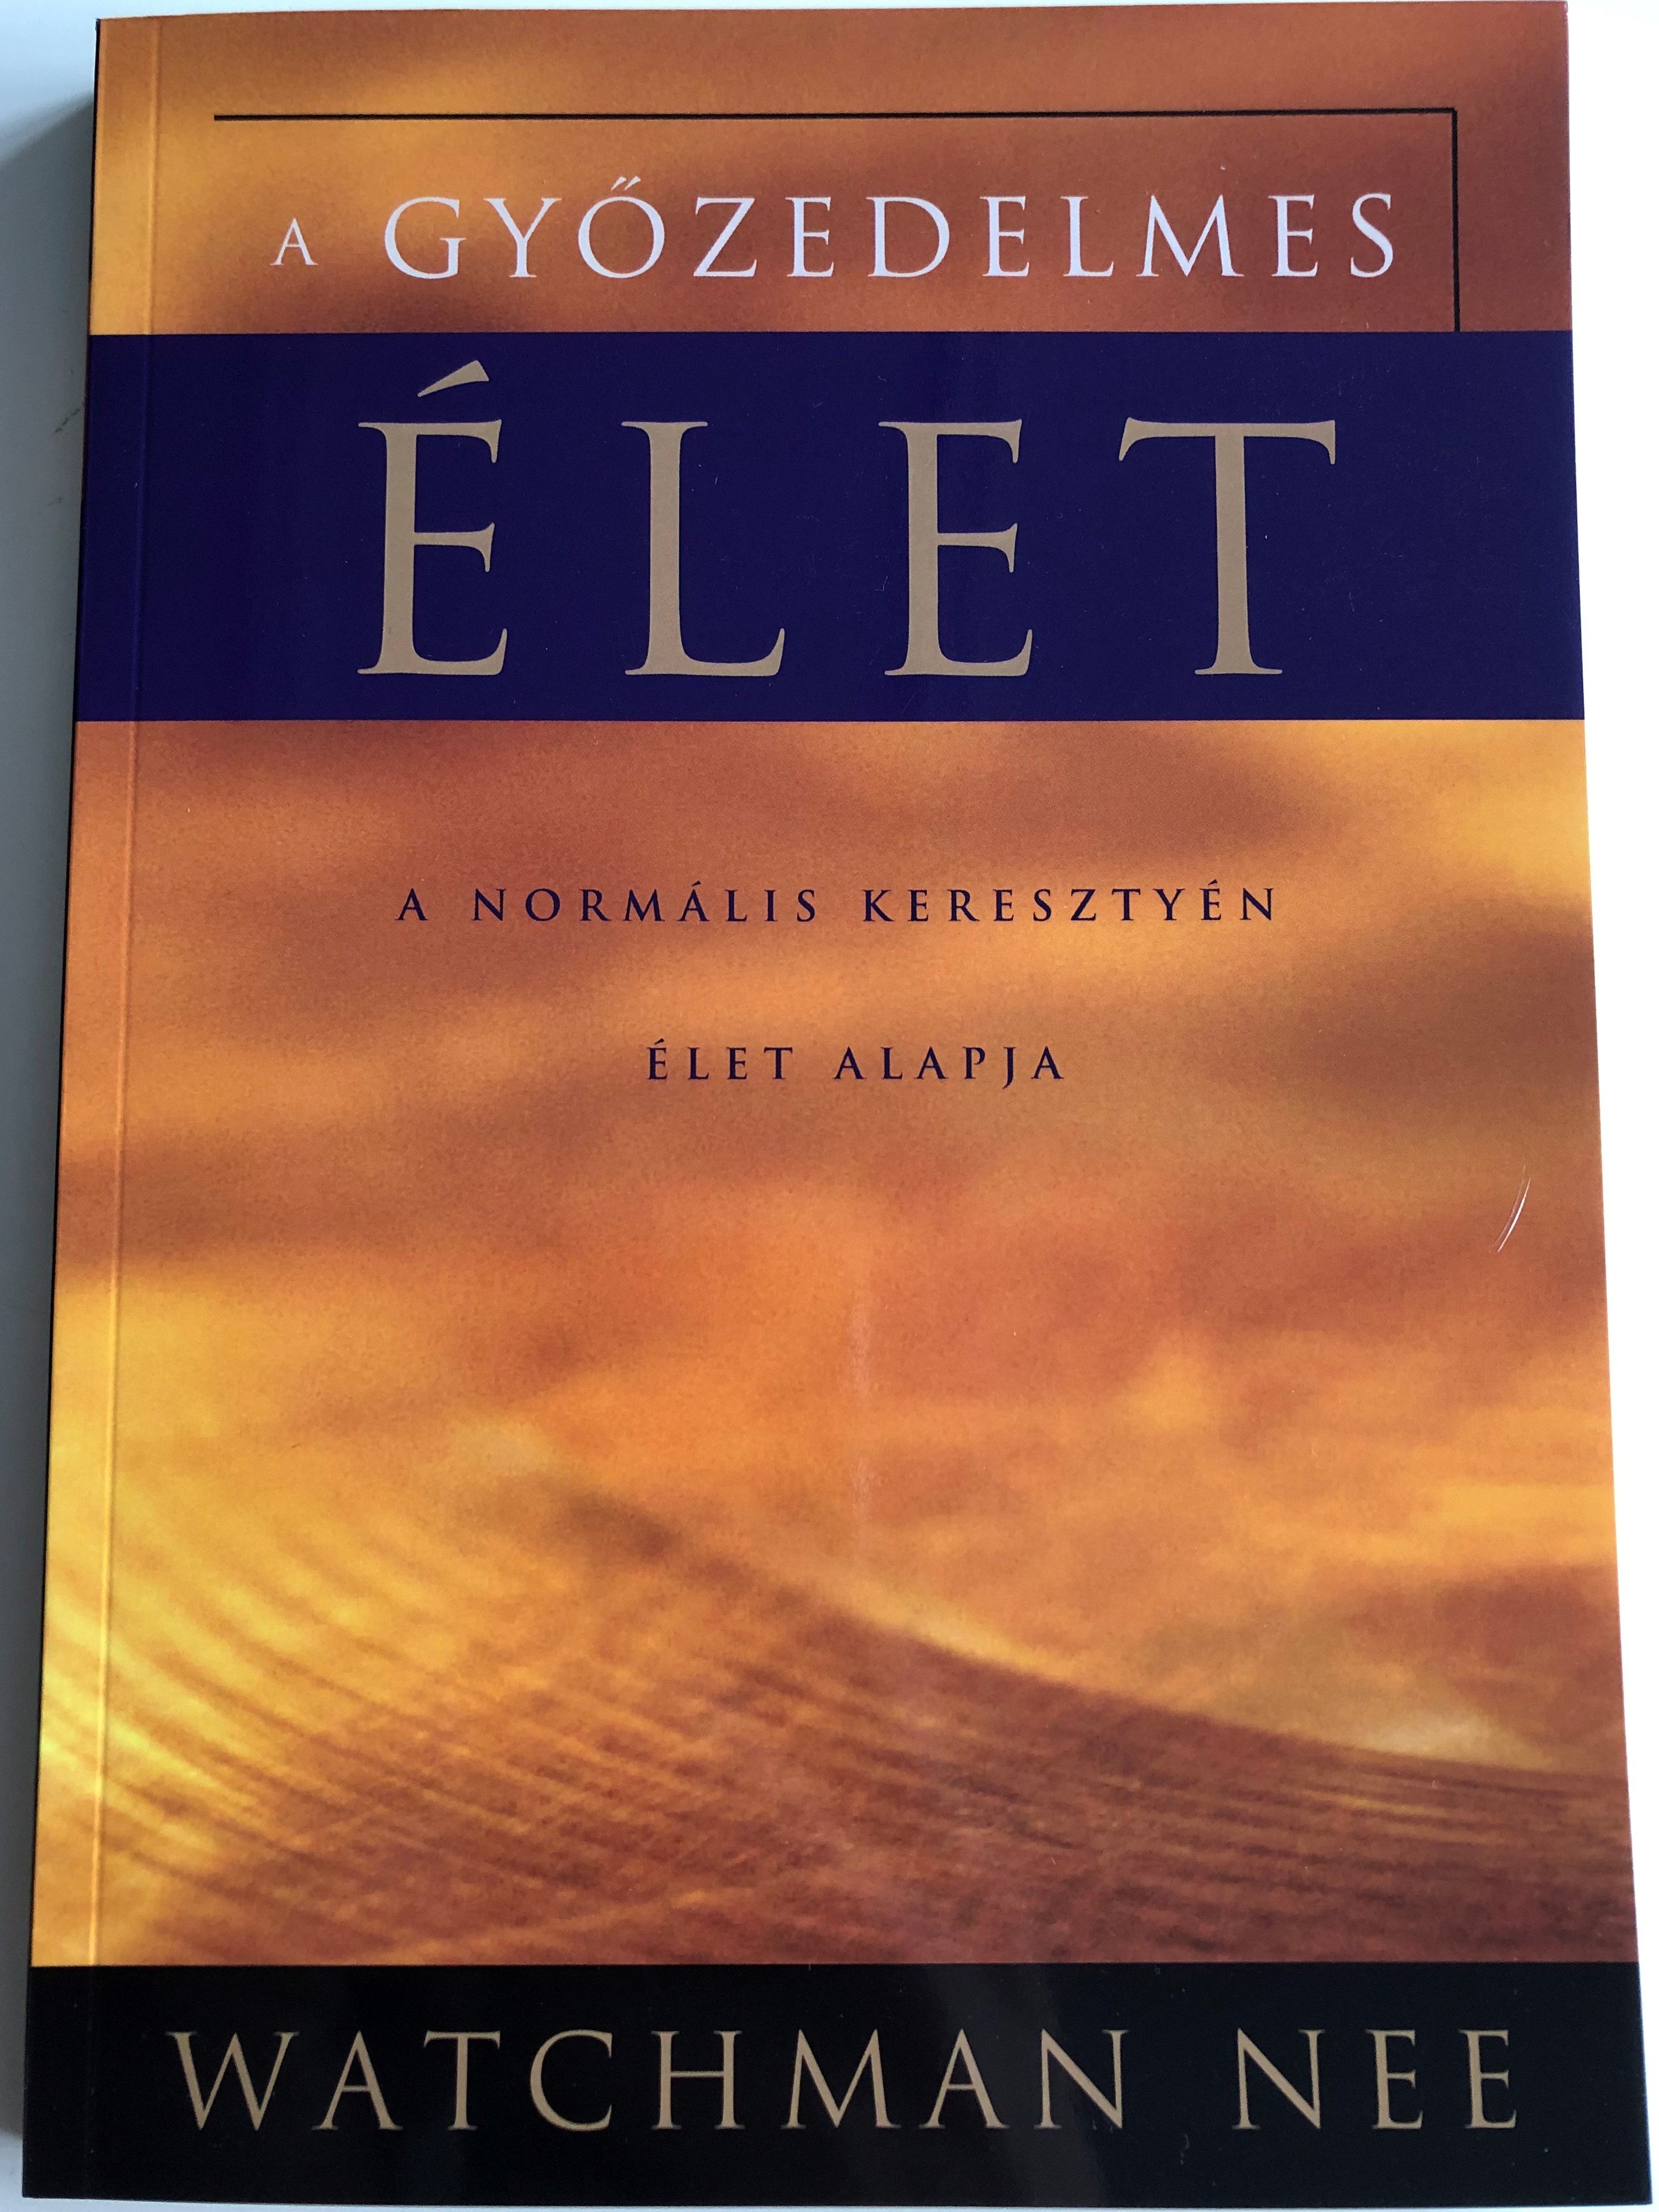 a-gy-zedelmes-let-by-watchman-nee-the-overcoming-life-in-hungarian-language-a-norm-lis-kereszty-n-let-alapja-1.jpg